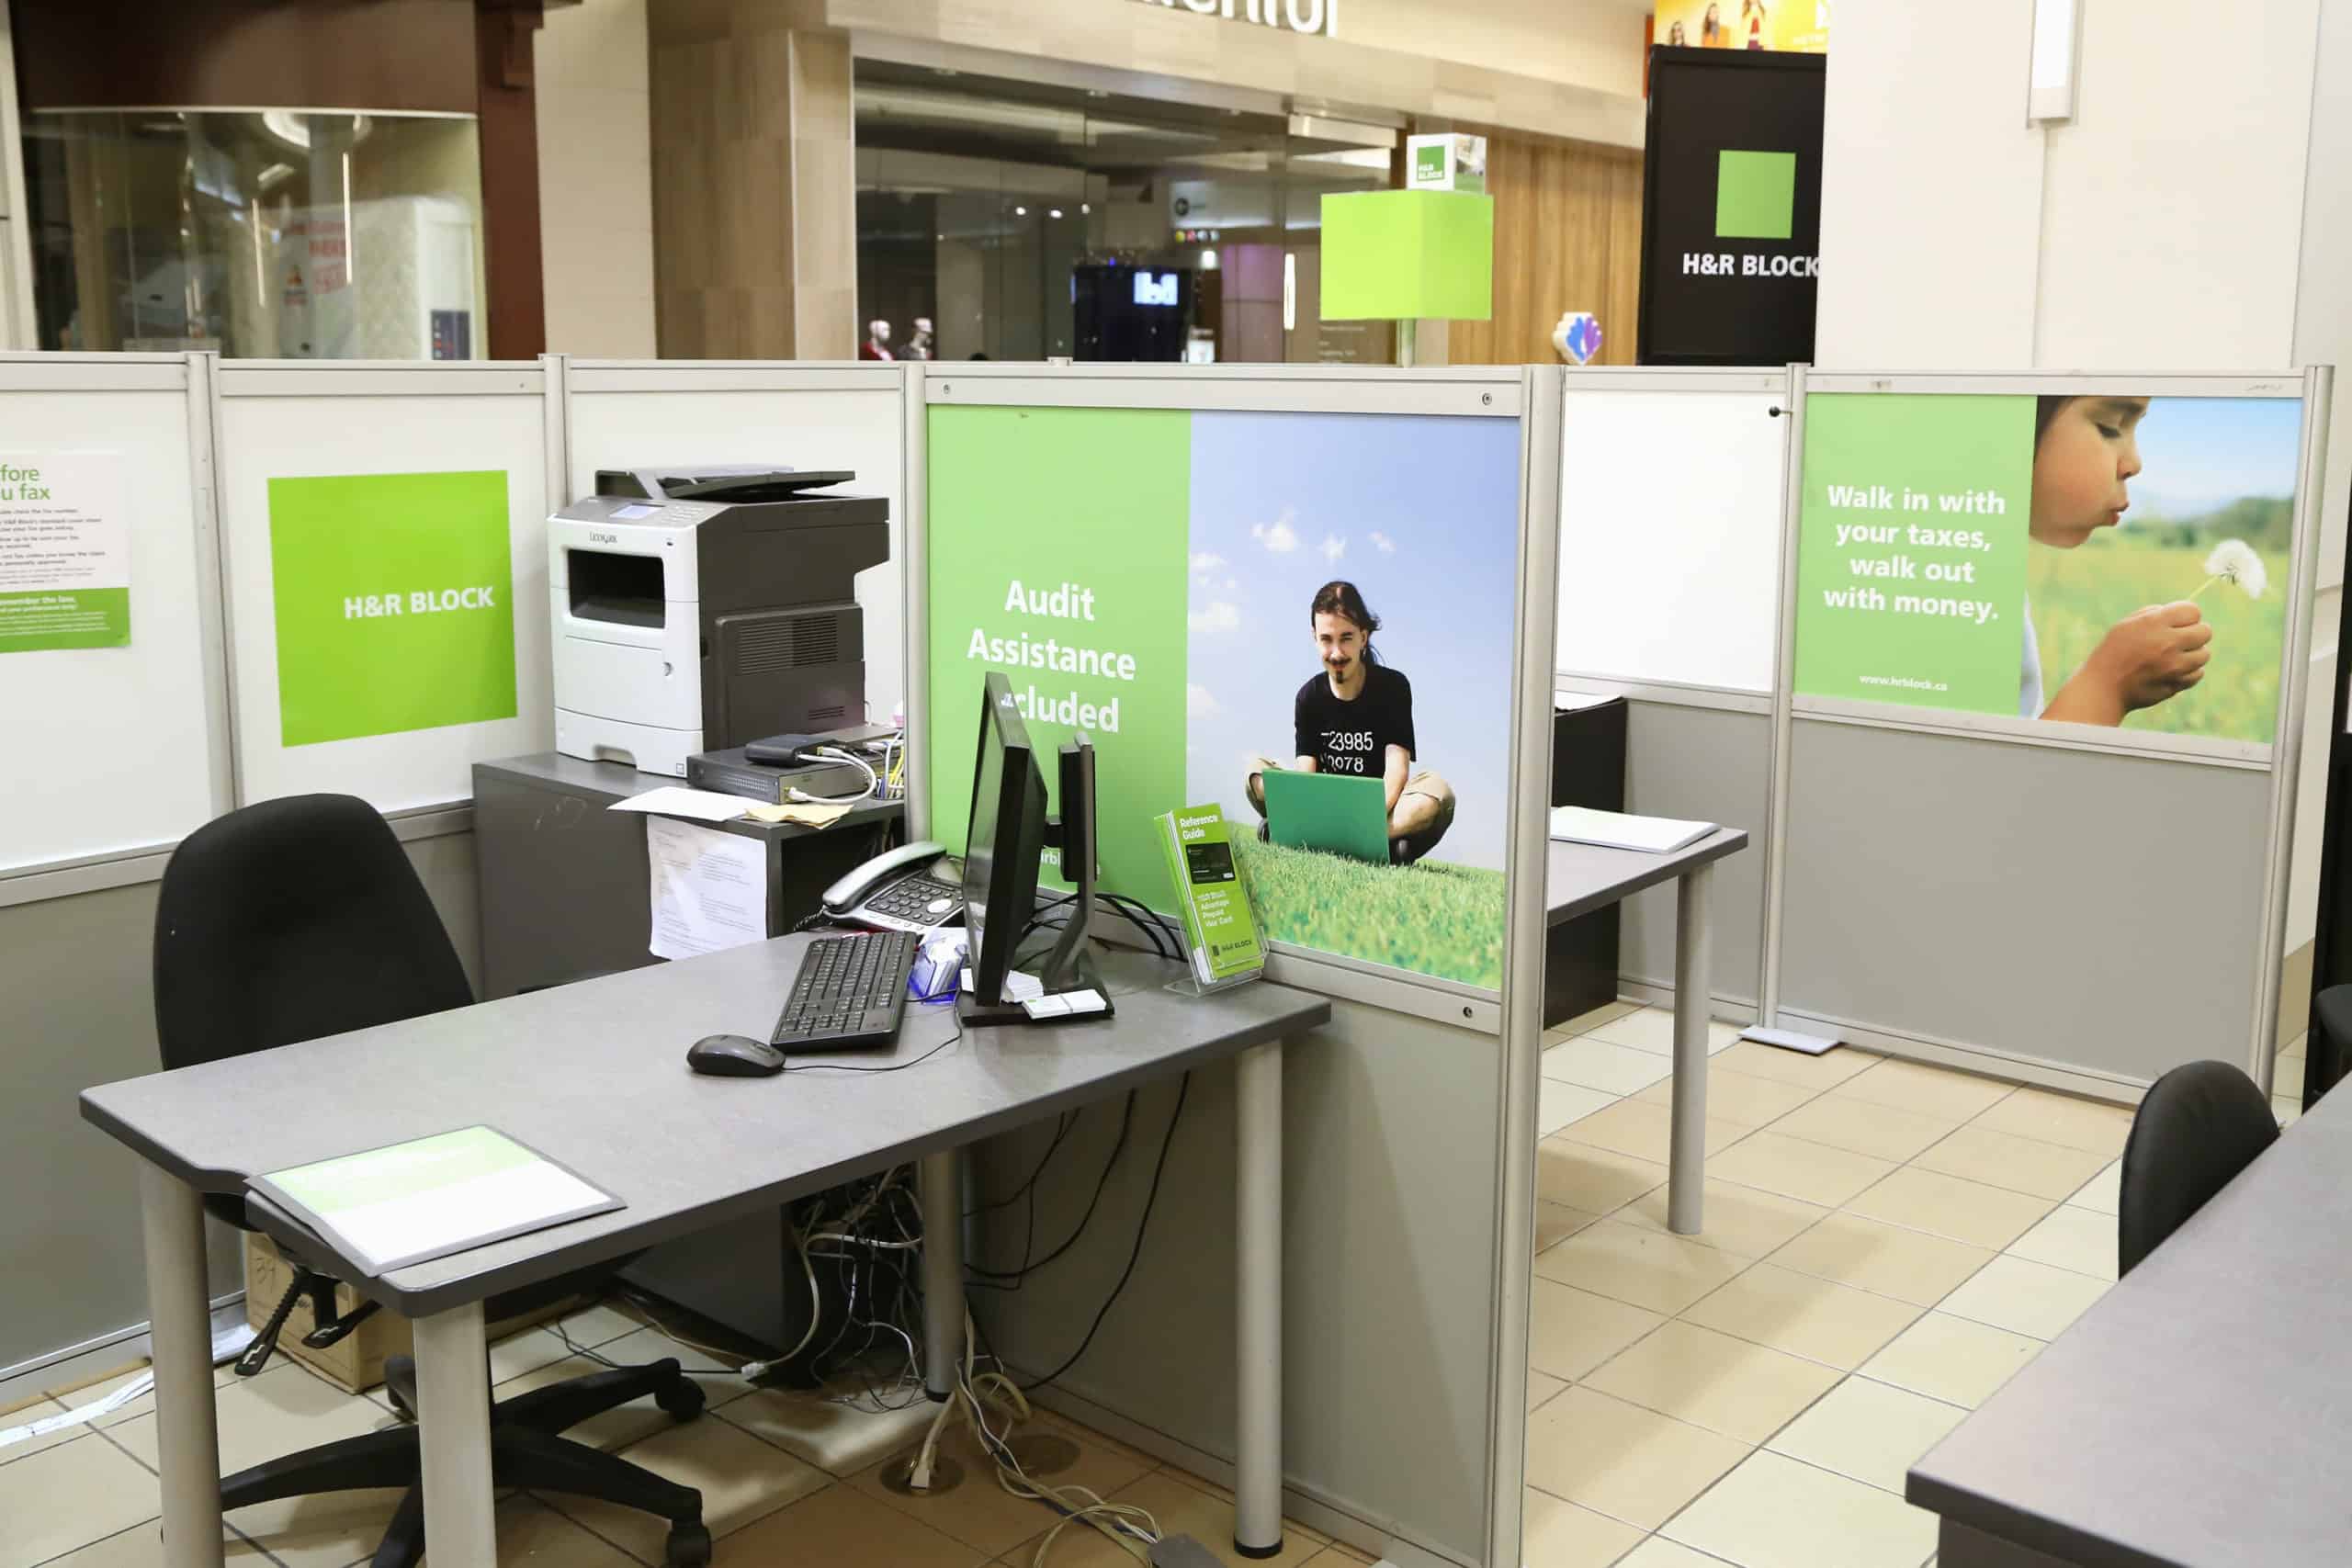 Cubicles of H&R Block tax services.